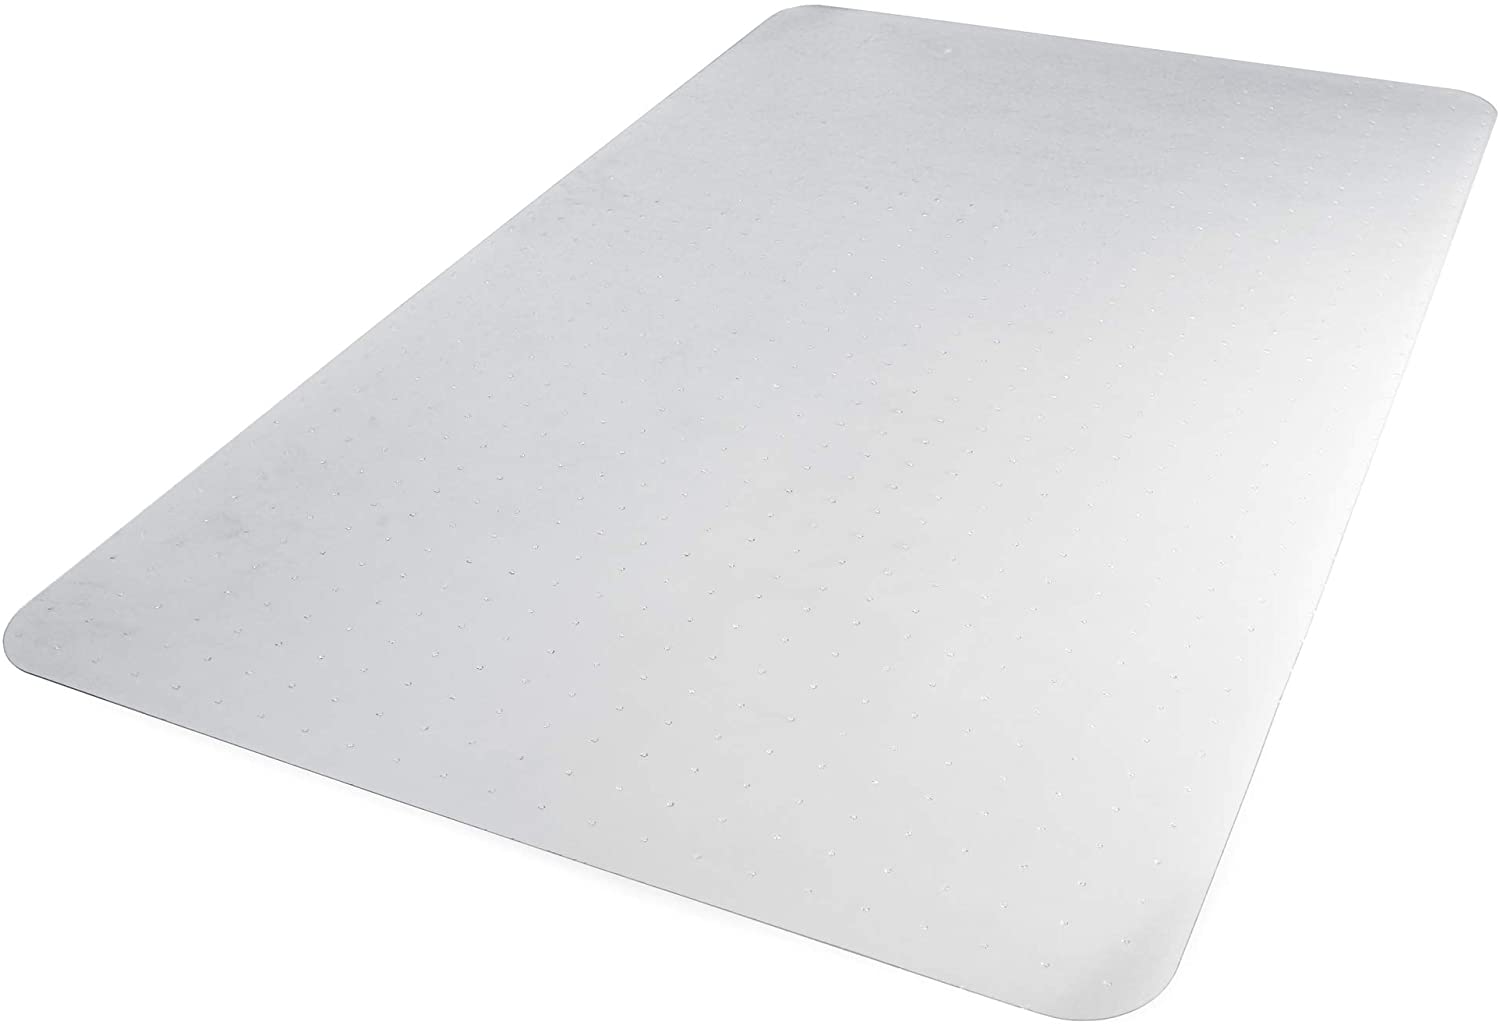 AmazonBasics Workstation High Impact Chair Mat For Carpeted Floors